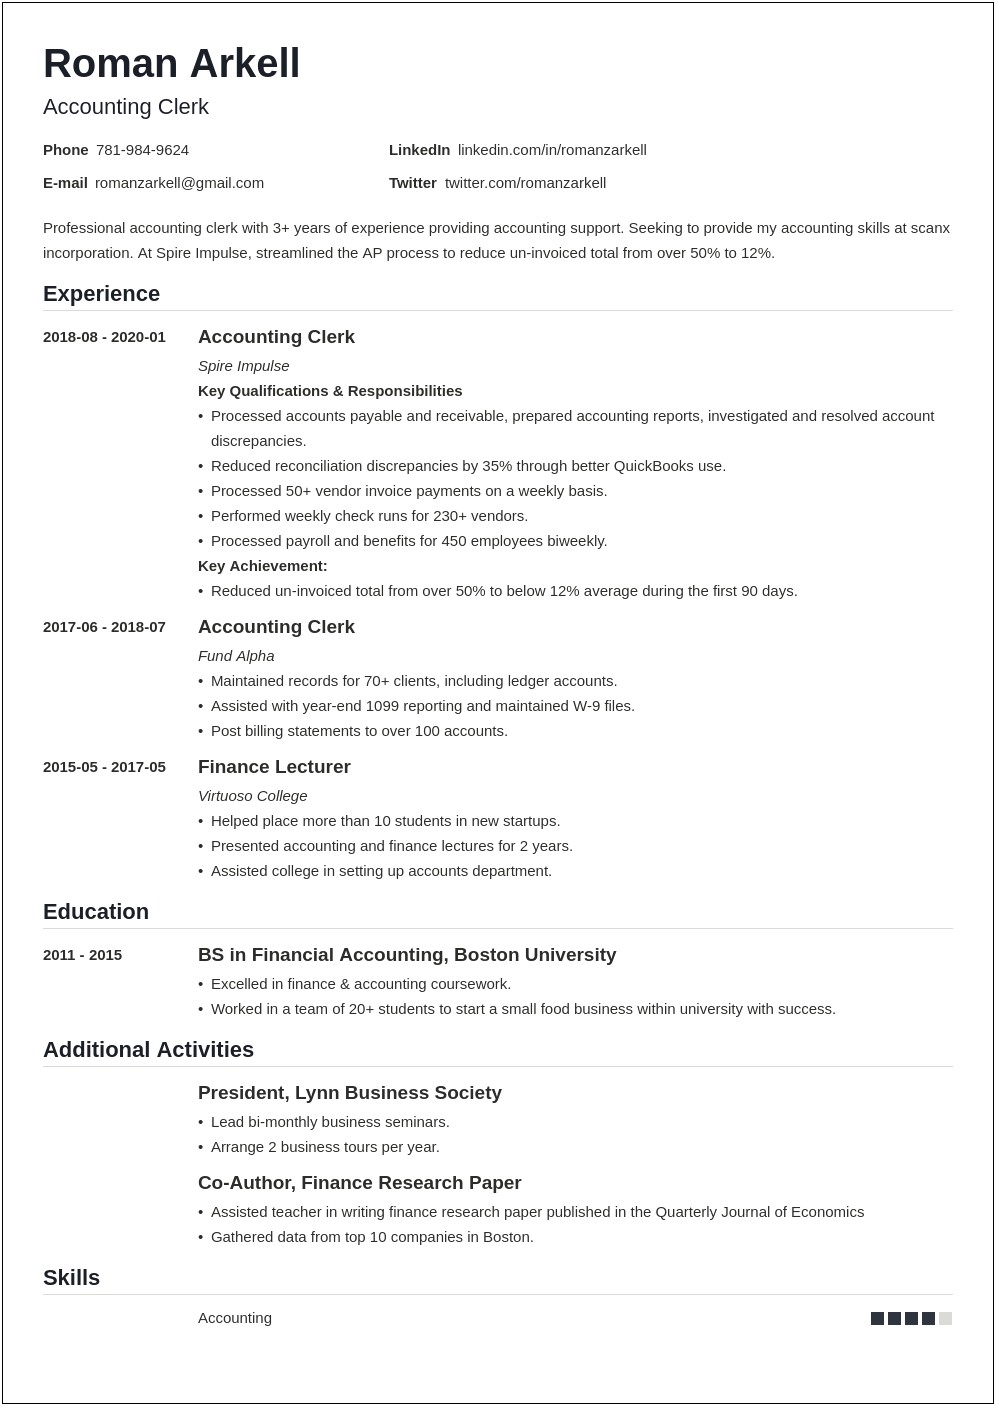 Accounting Skills To List On Resume